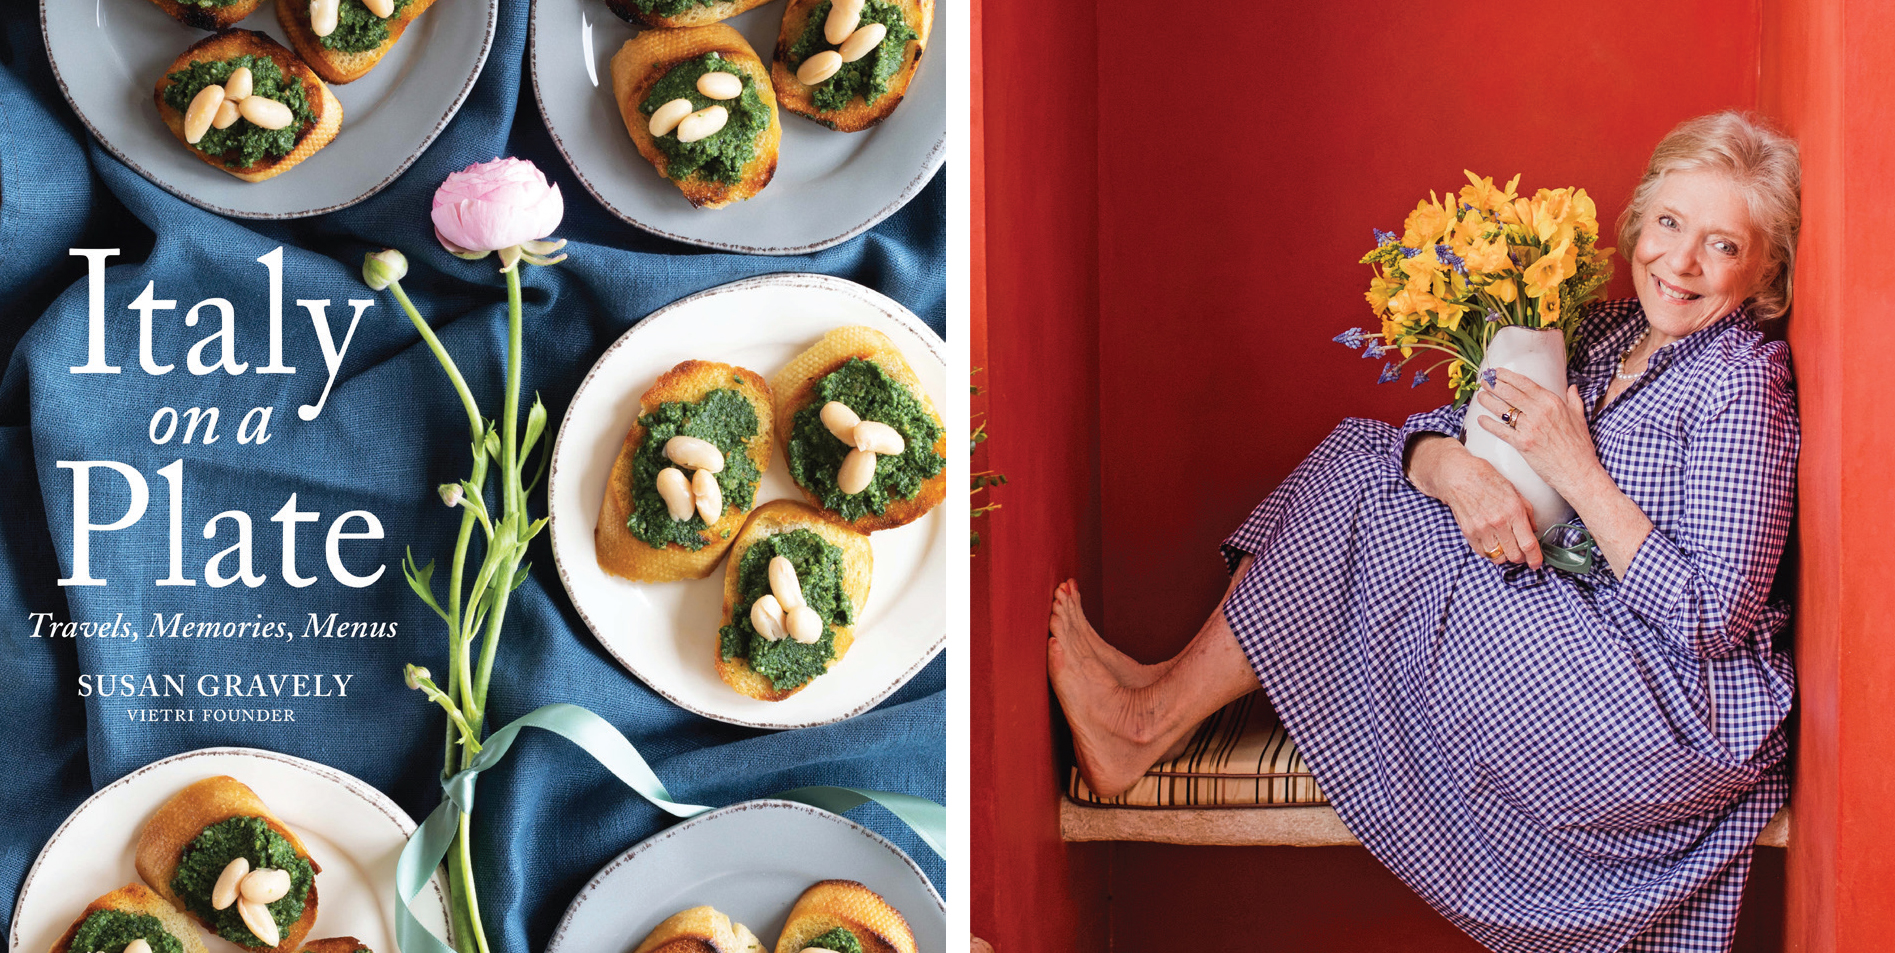 Susan Gravely and her new book, Italy on a Plate